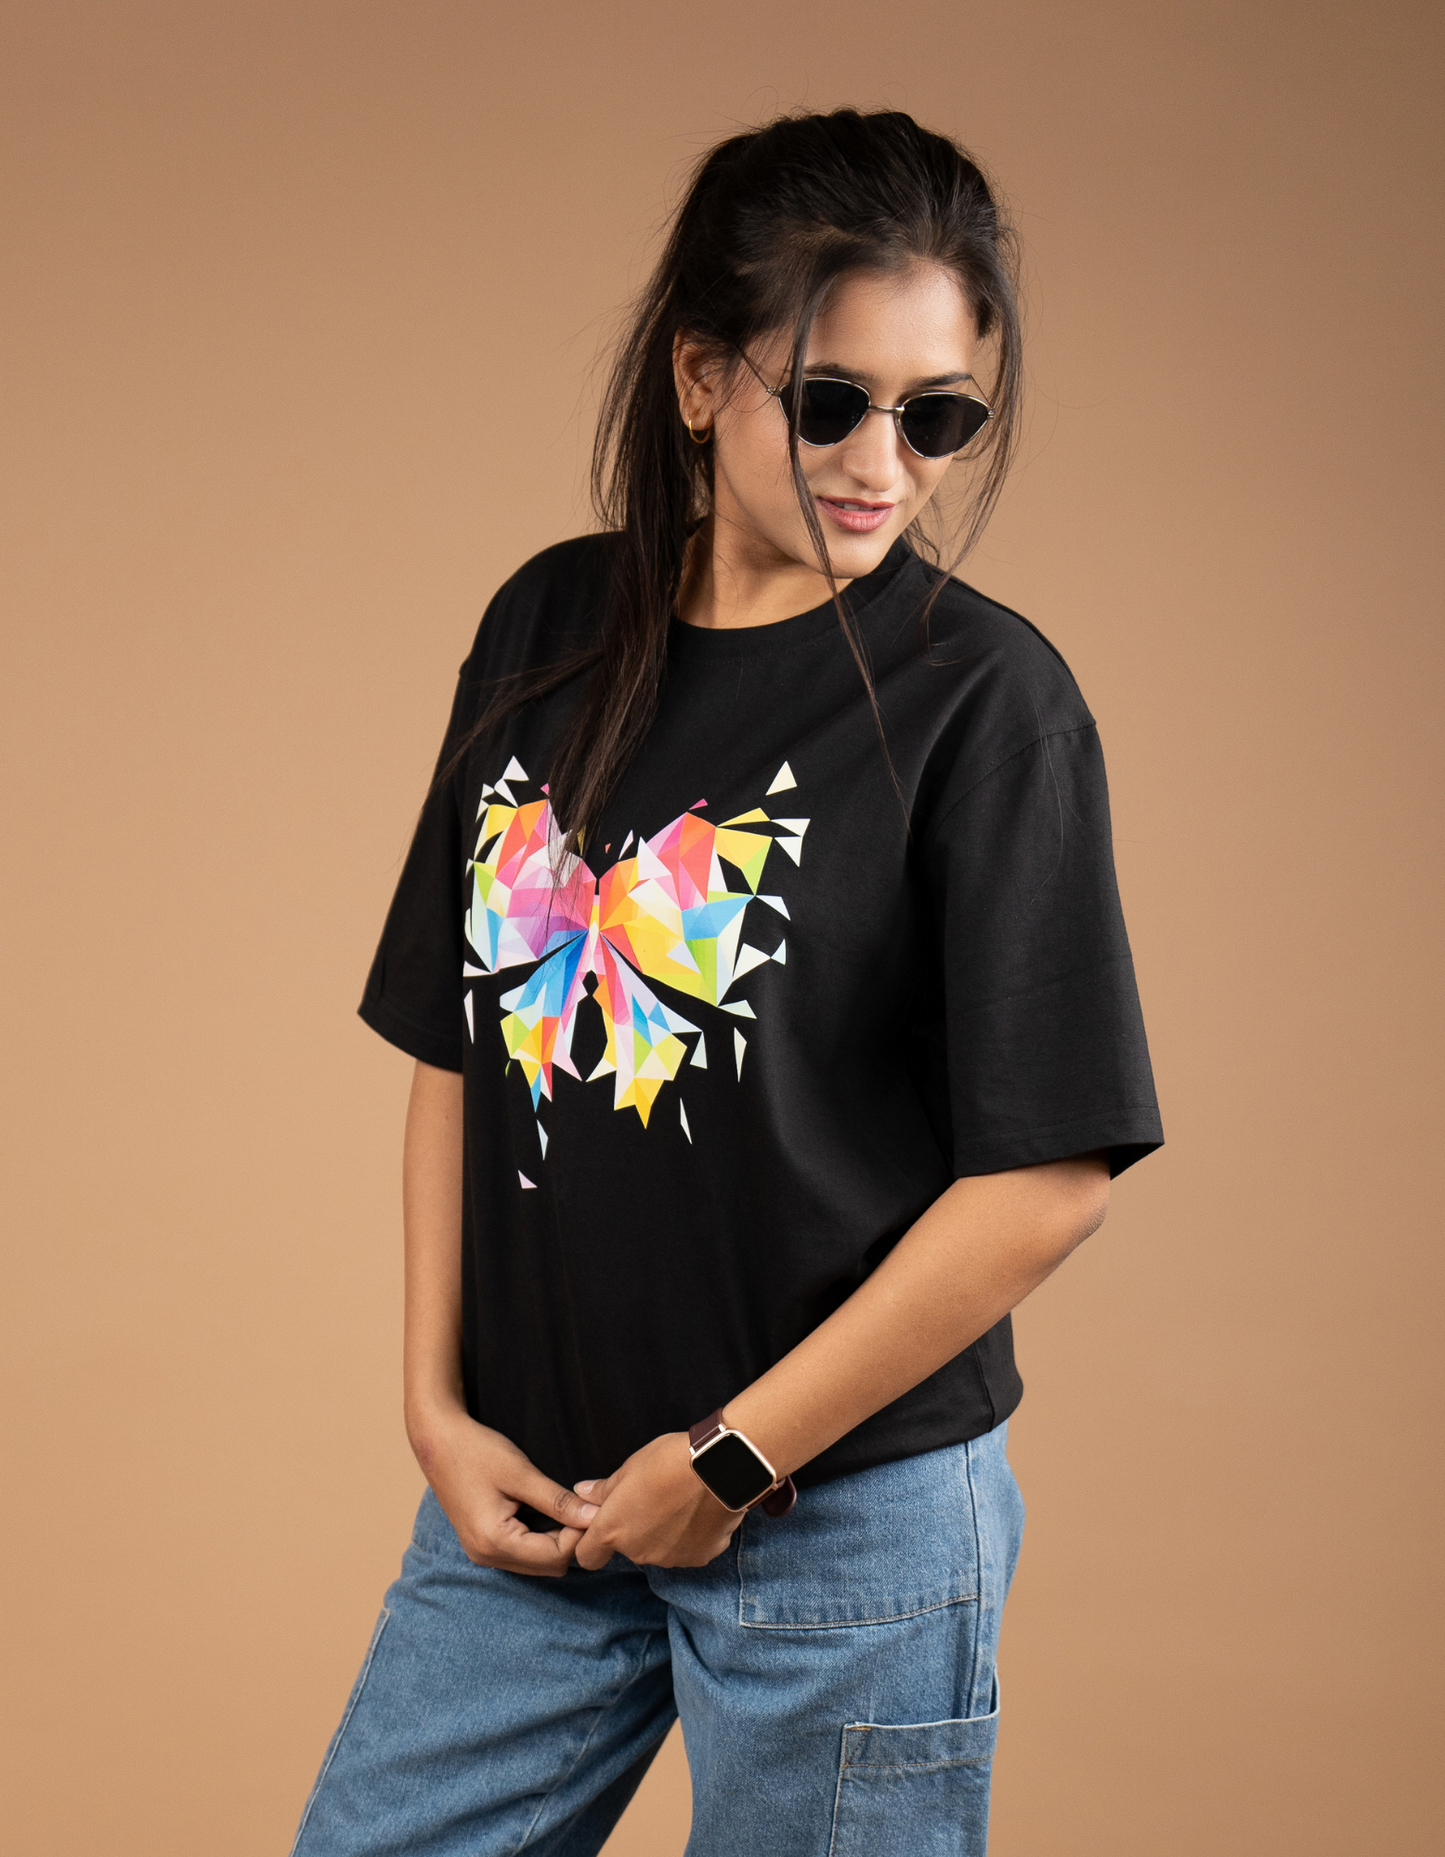 Butterfly Oversized T-shirt side pose